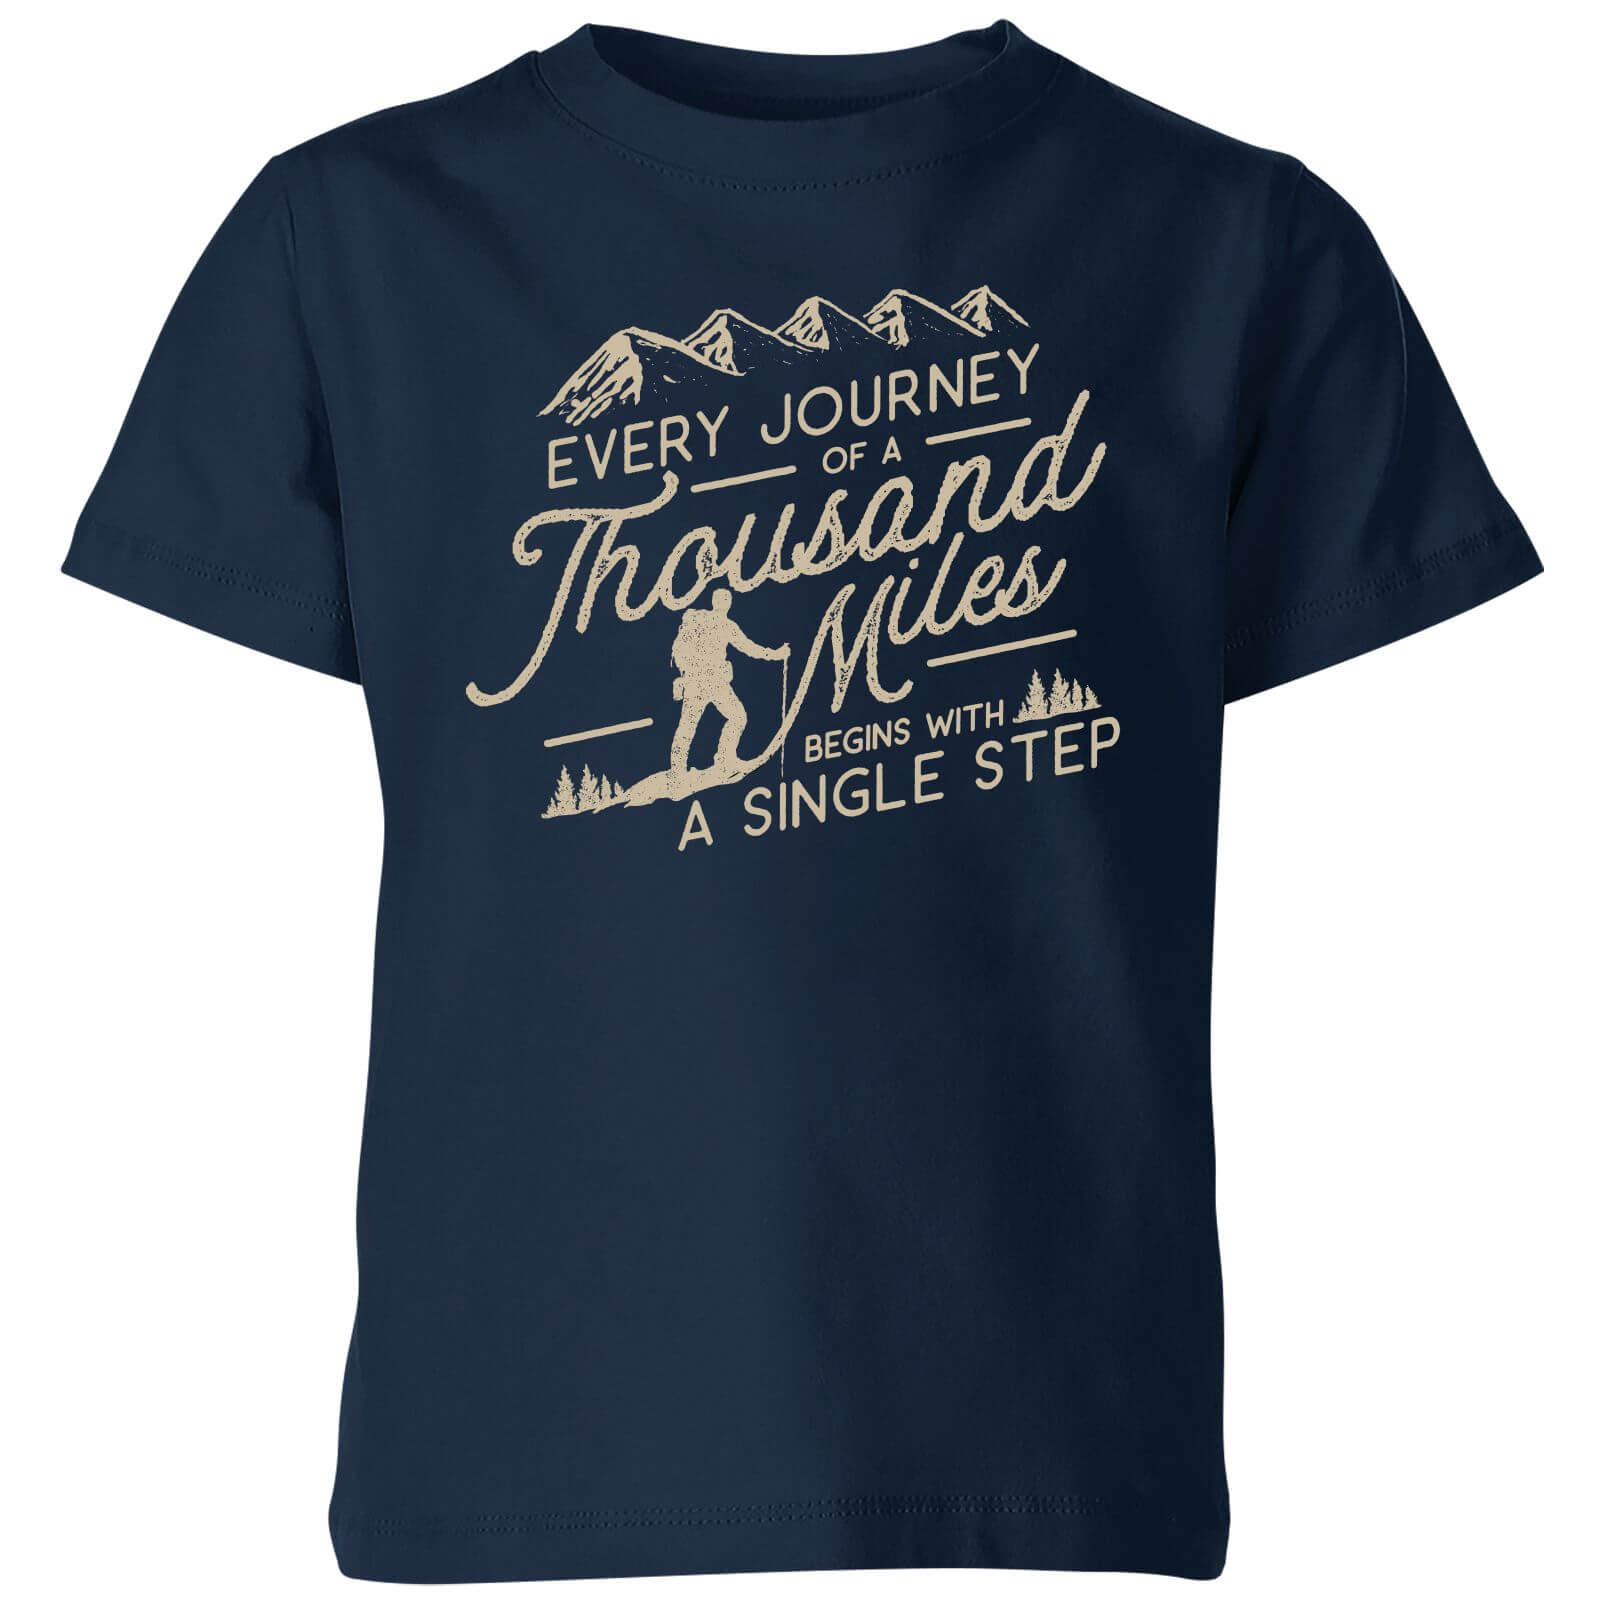 Every Journey Begins With A Single Step Kids' T-Shirt - Navy - 3-4 Years - Navy